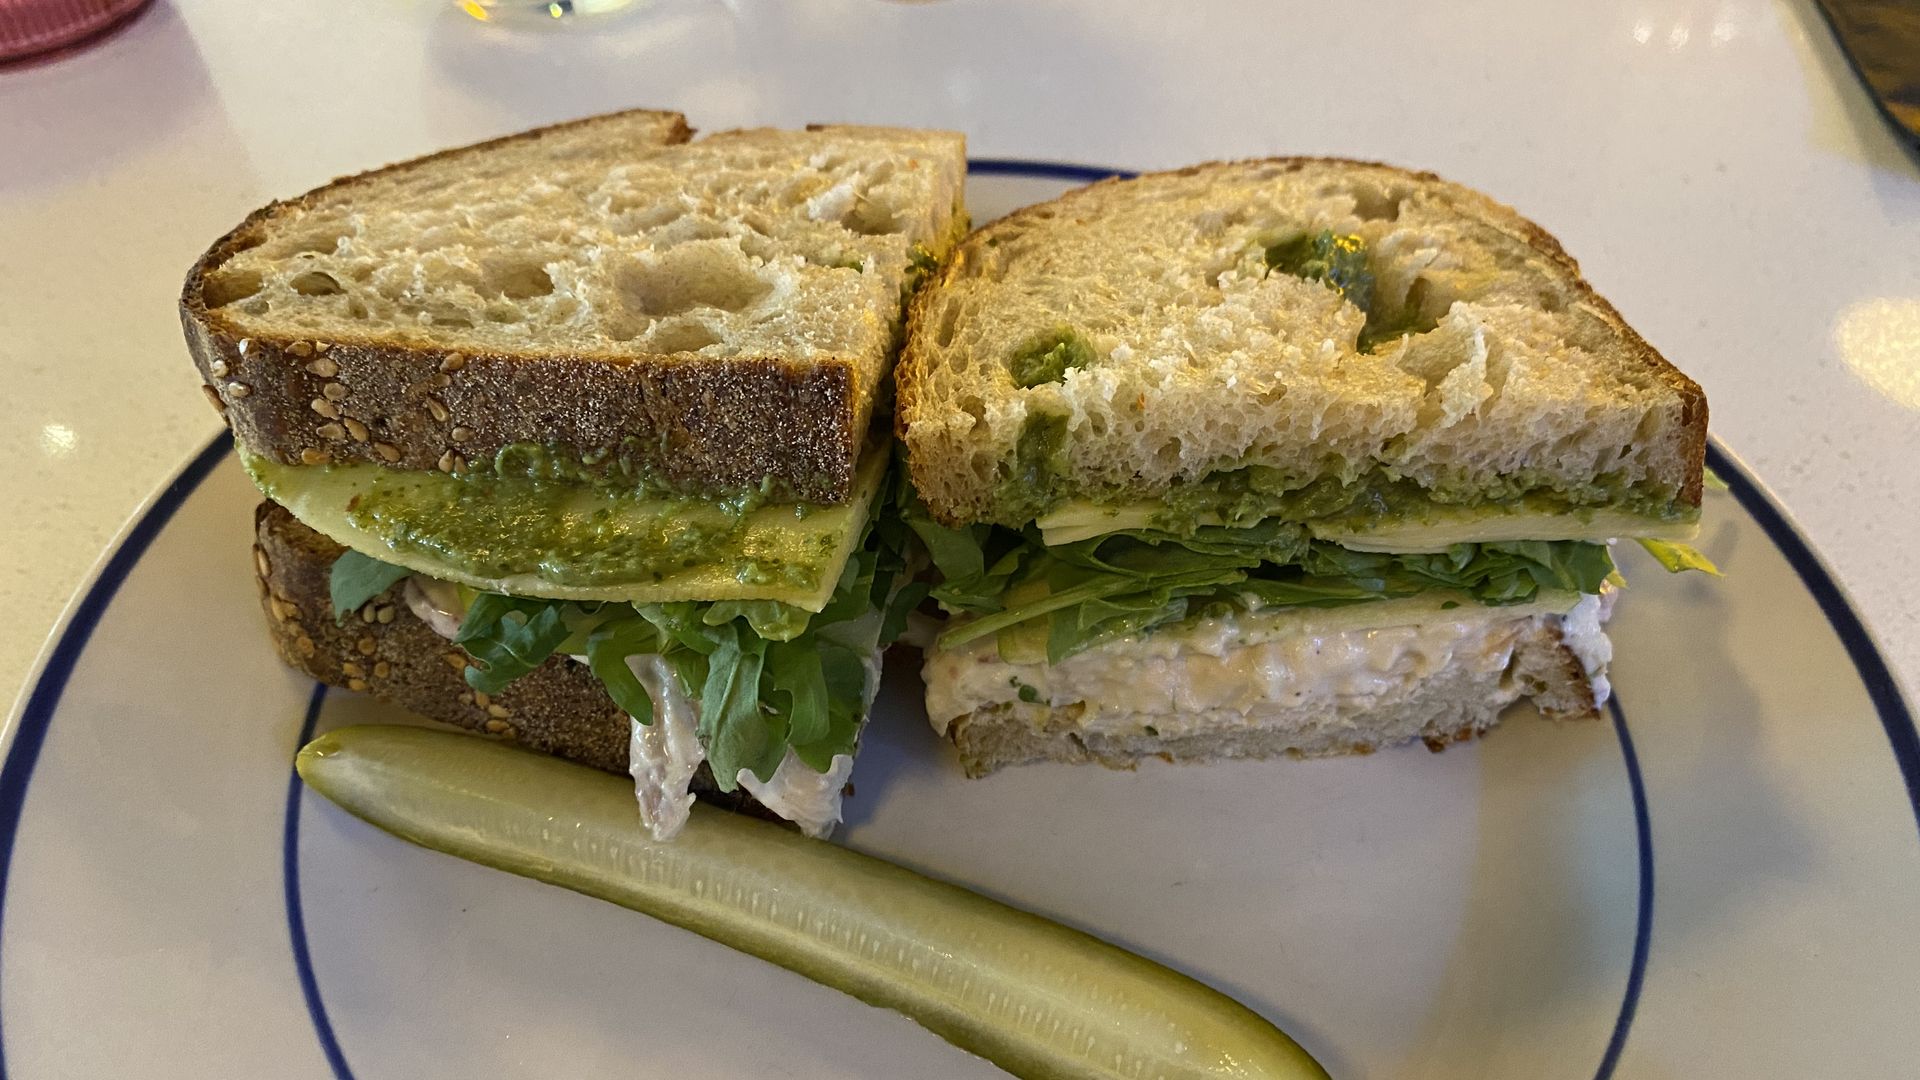 A sandwich that's been cut in half on a plate with a pickle spear.